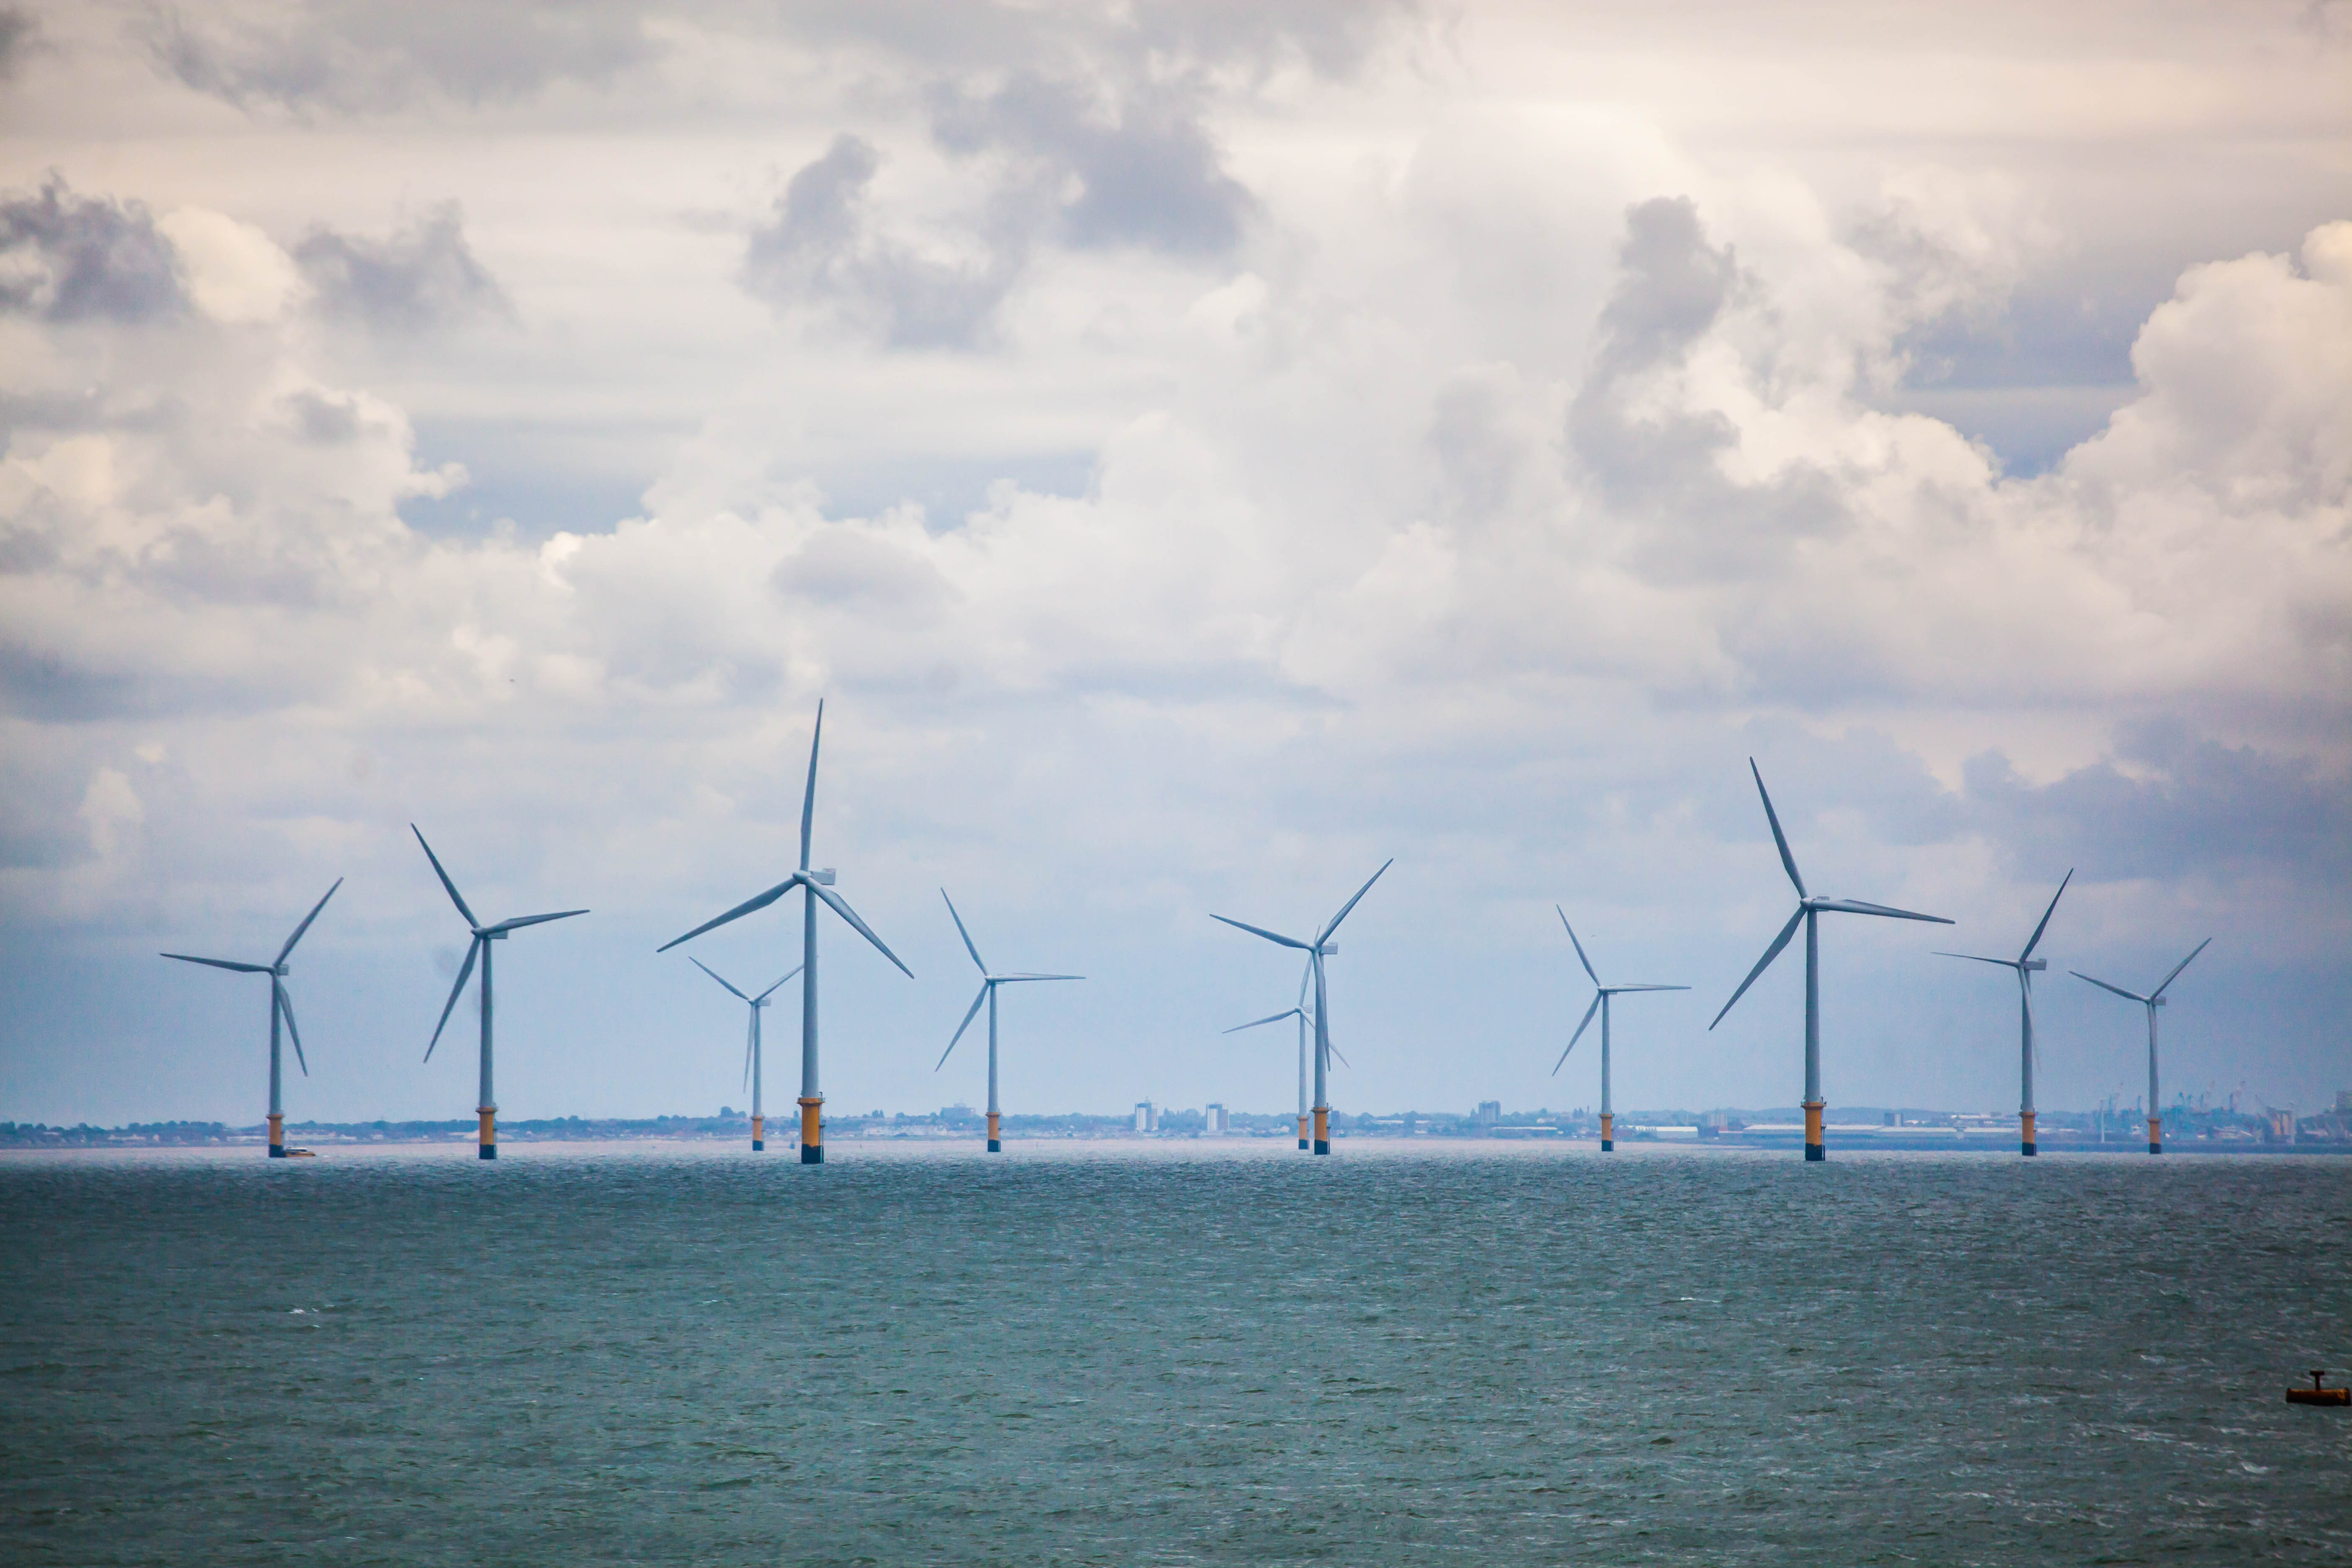 Burbo Bank Extension offshore wind farm in the UK